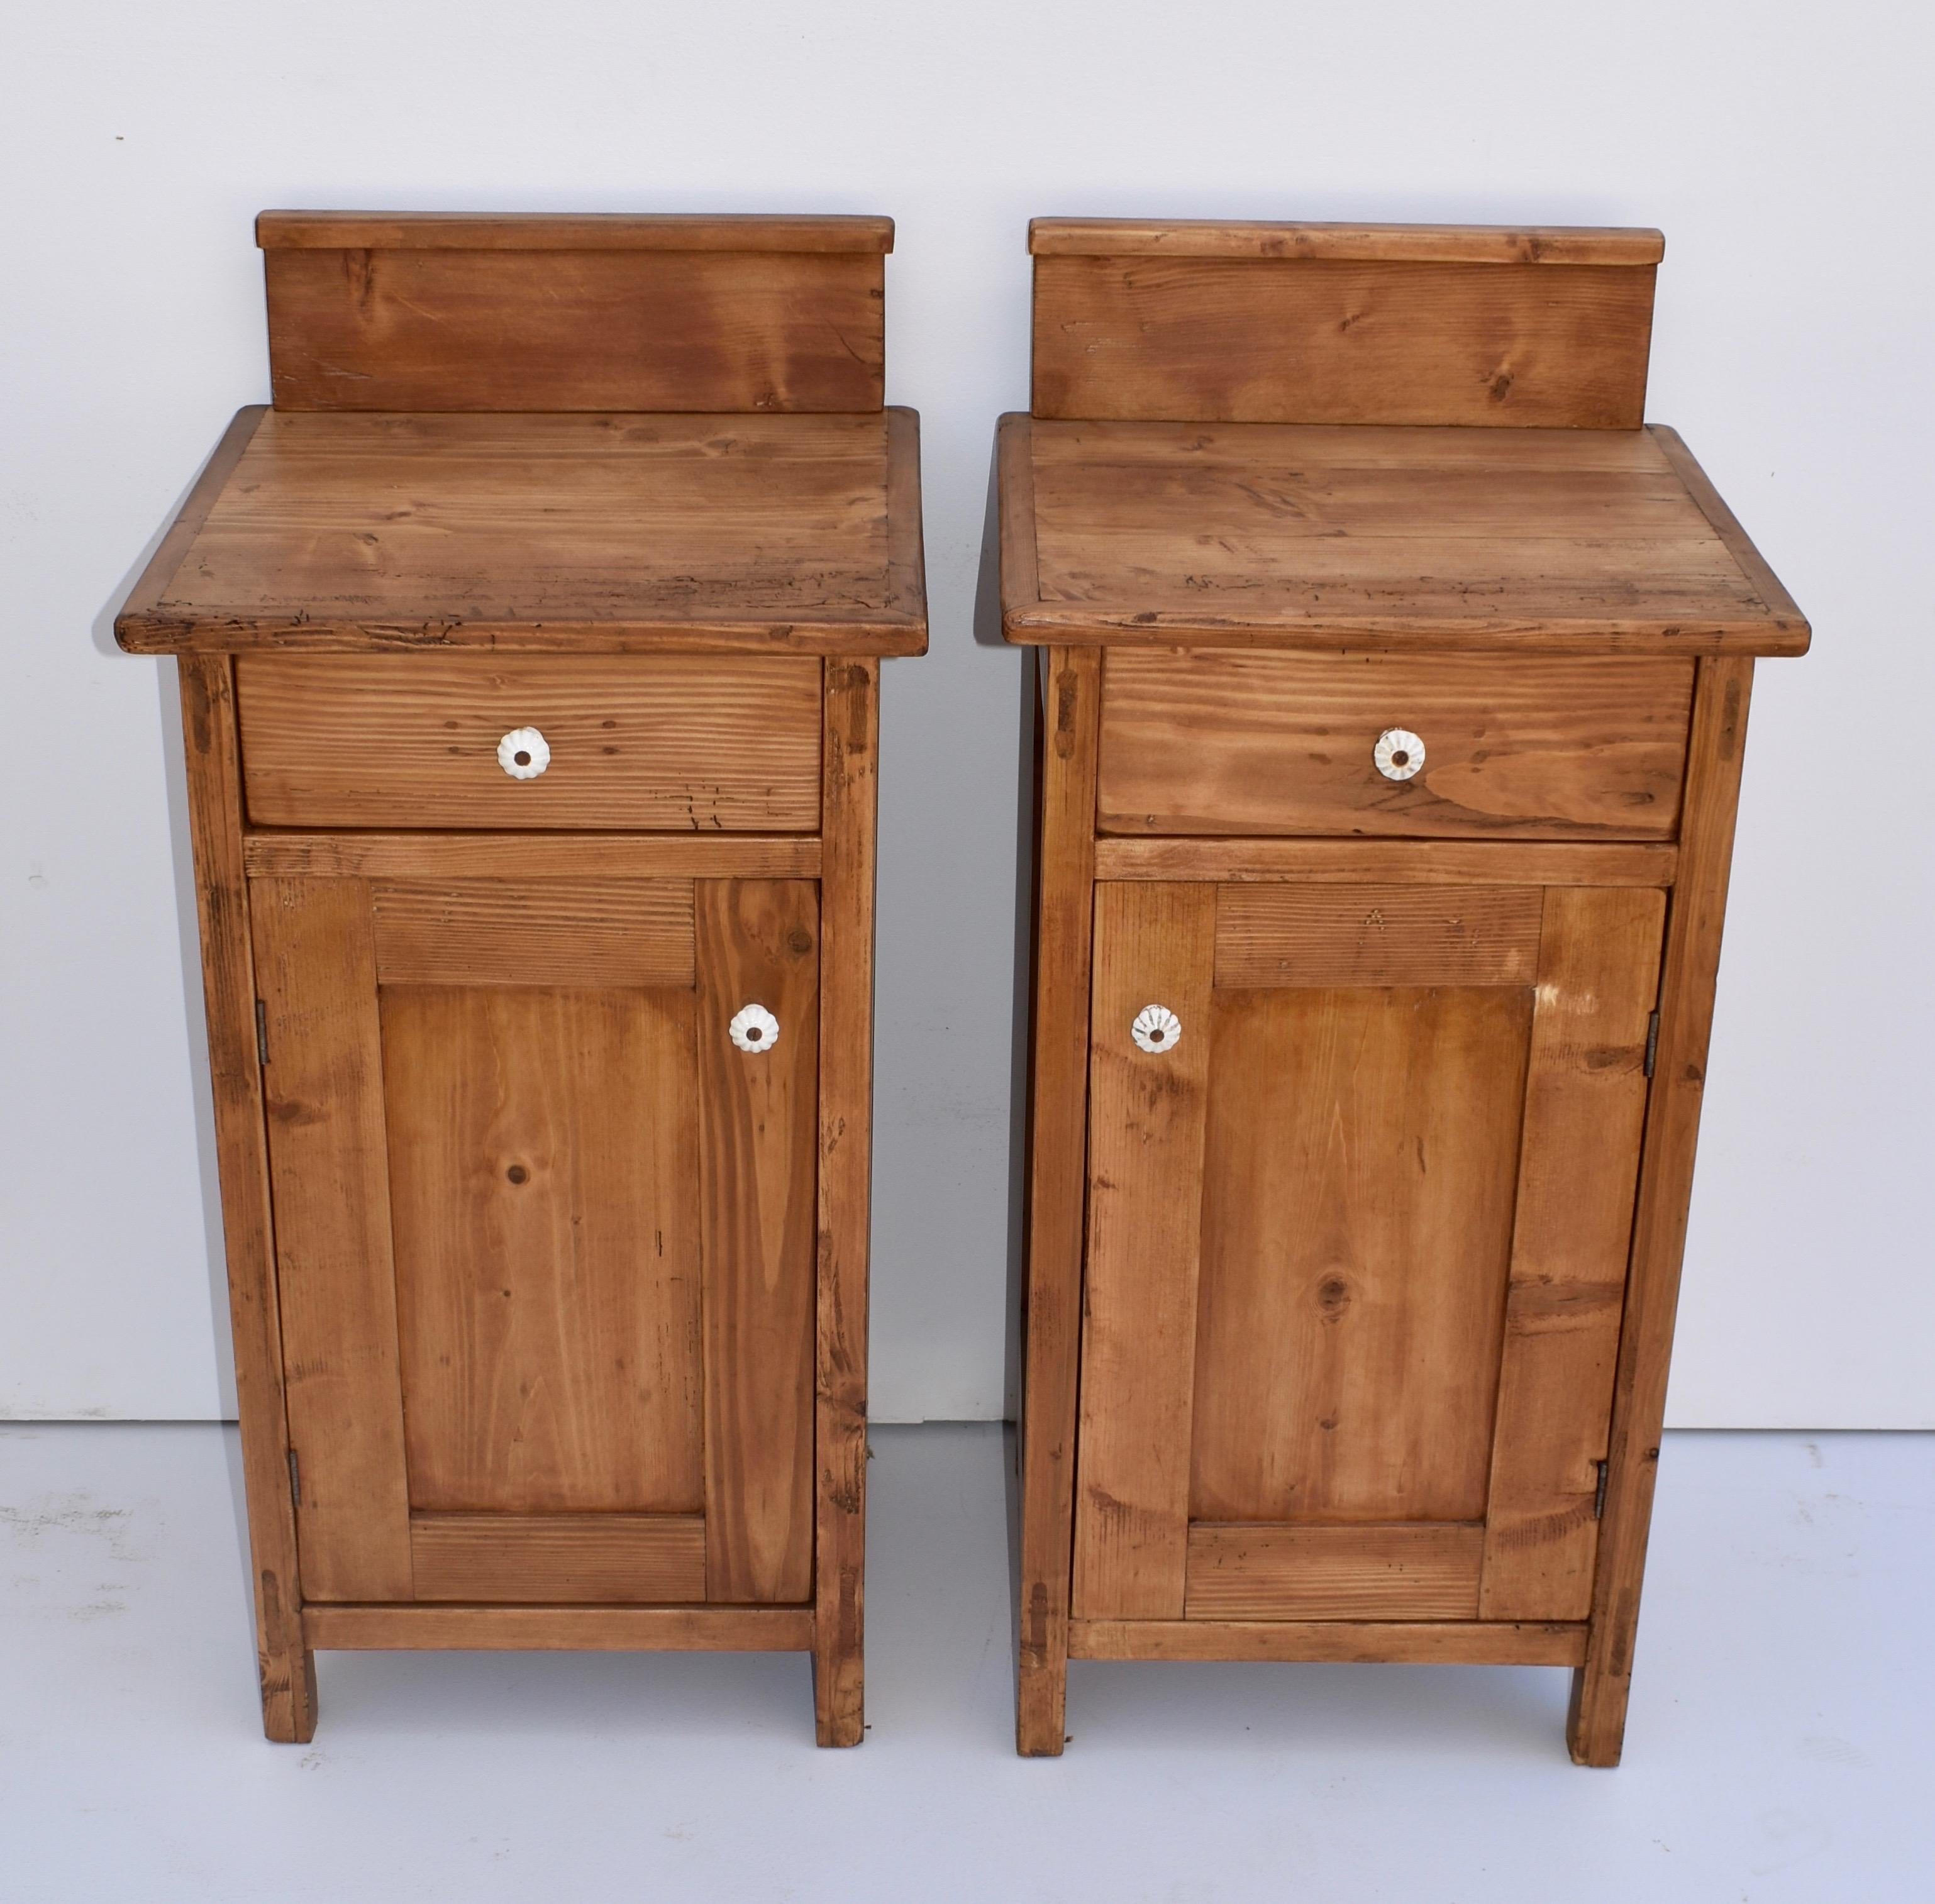 84. 23VJL84 (8323), pair of pine nightstands, Hungary, circa 1880, measures: 18” W x 17” D x 37” H $1095.00 This is a pair of superior quality pine nightstands with one door and one handcut dovetailed drawer. The sides are paneled and the 5” high